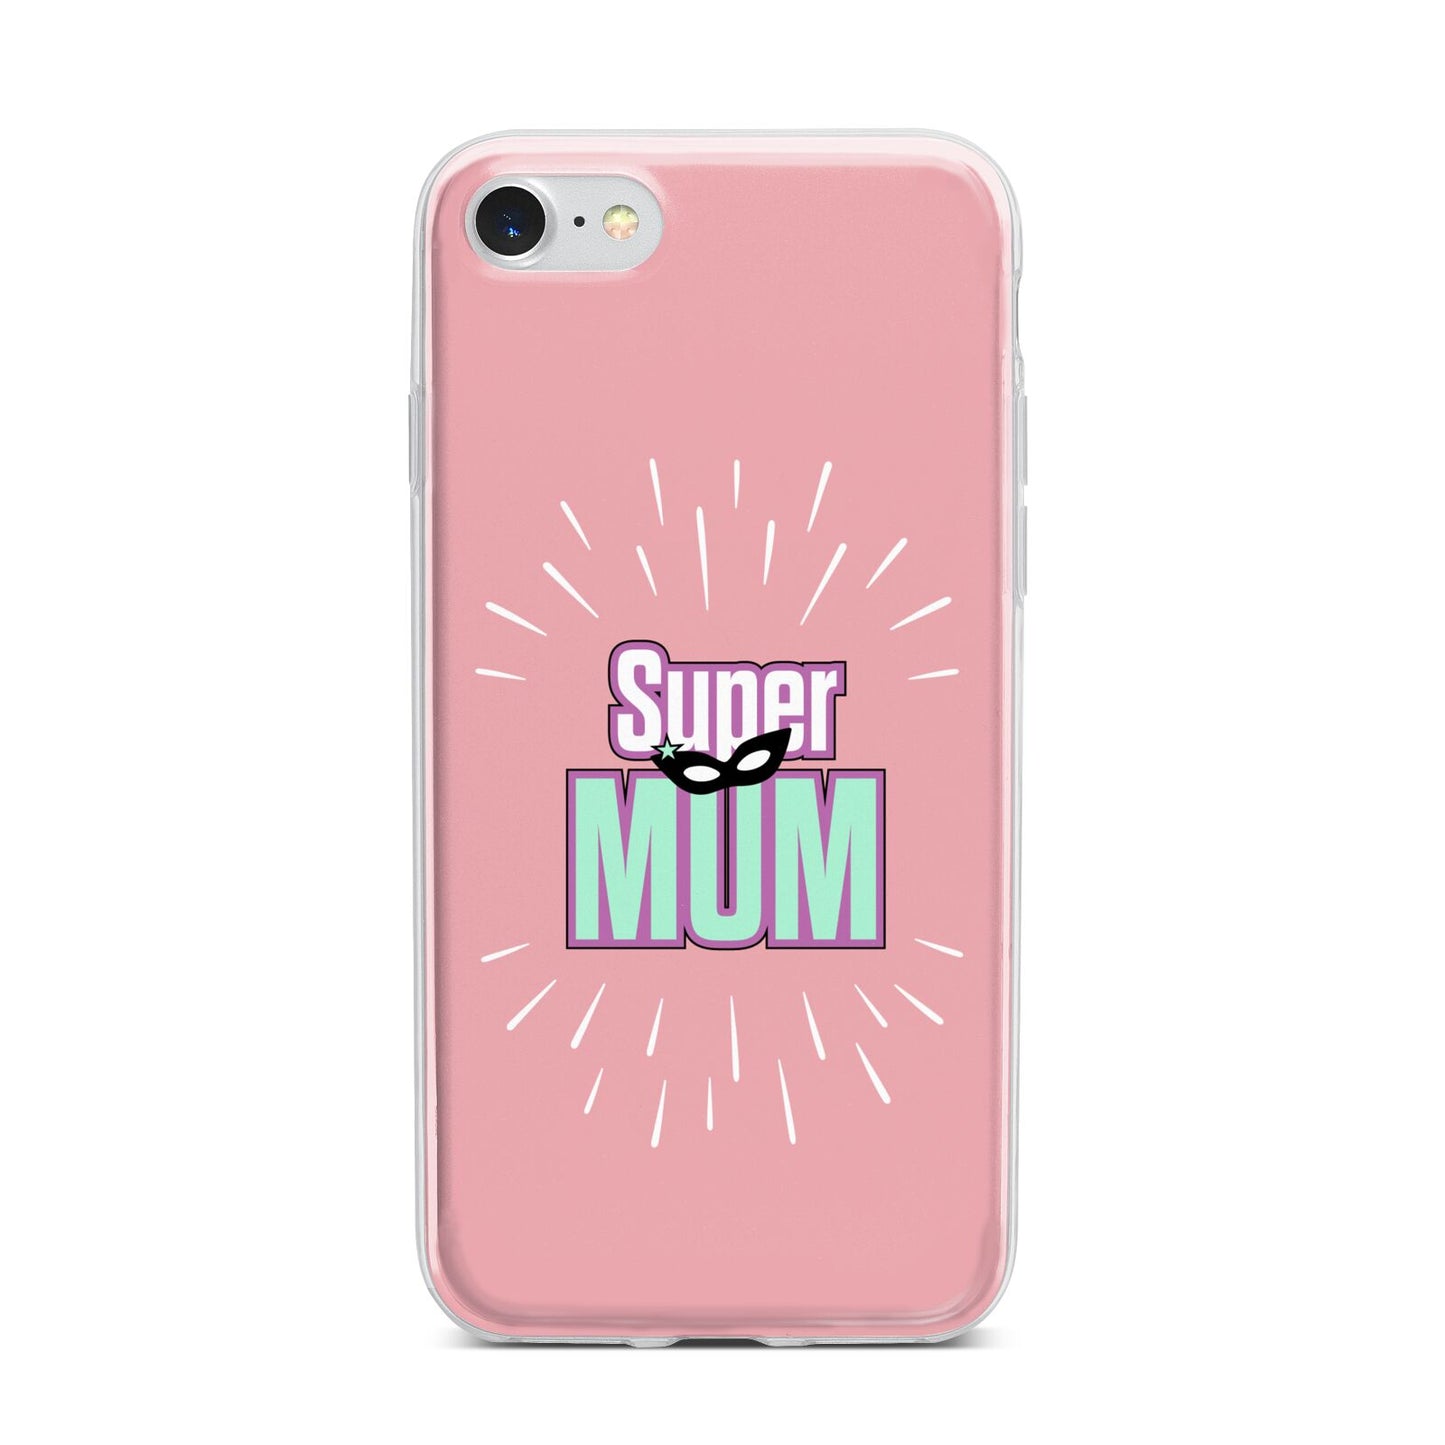 Super Mum Mothers Day iPhone 7 Bumper Case on Silver iPhone